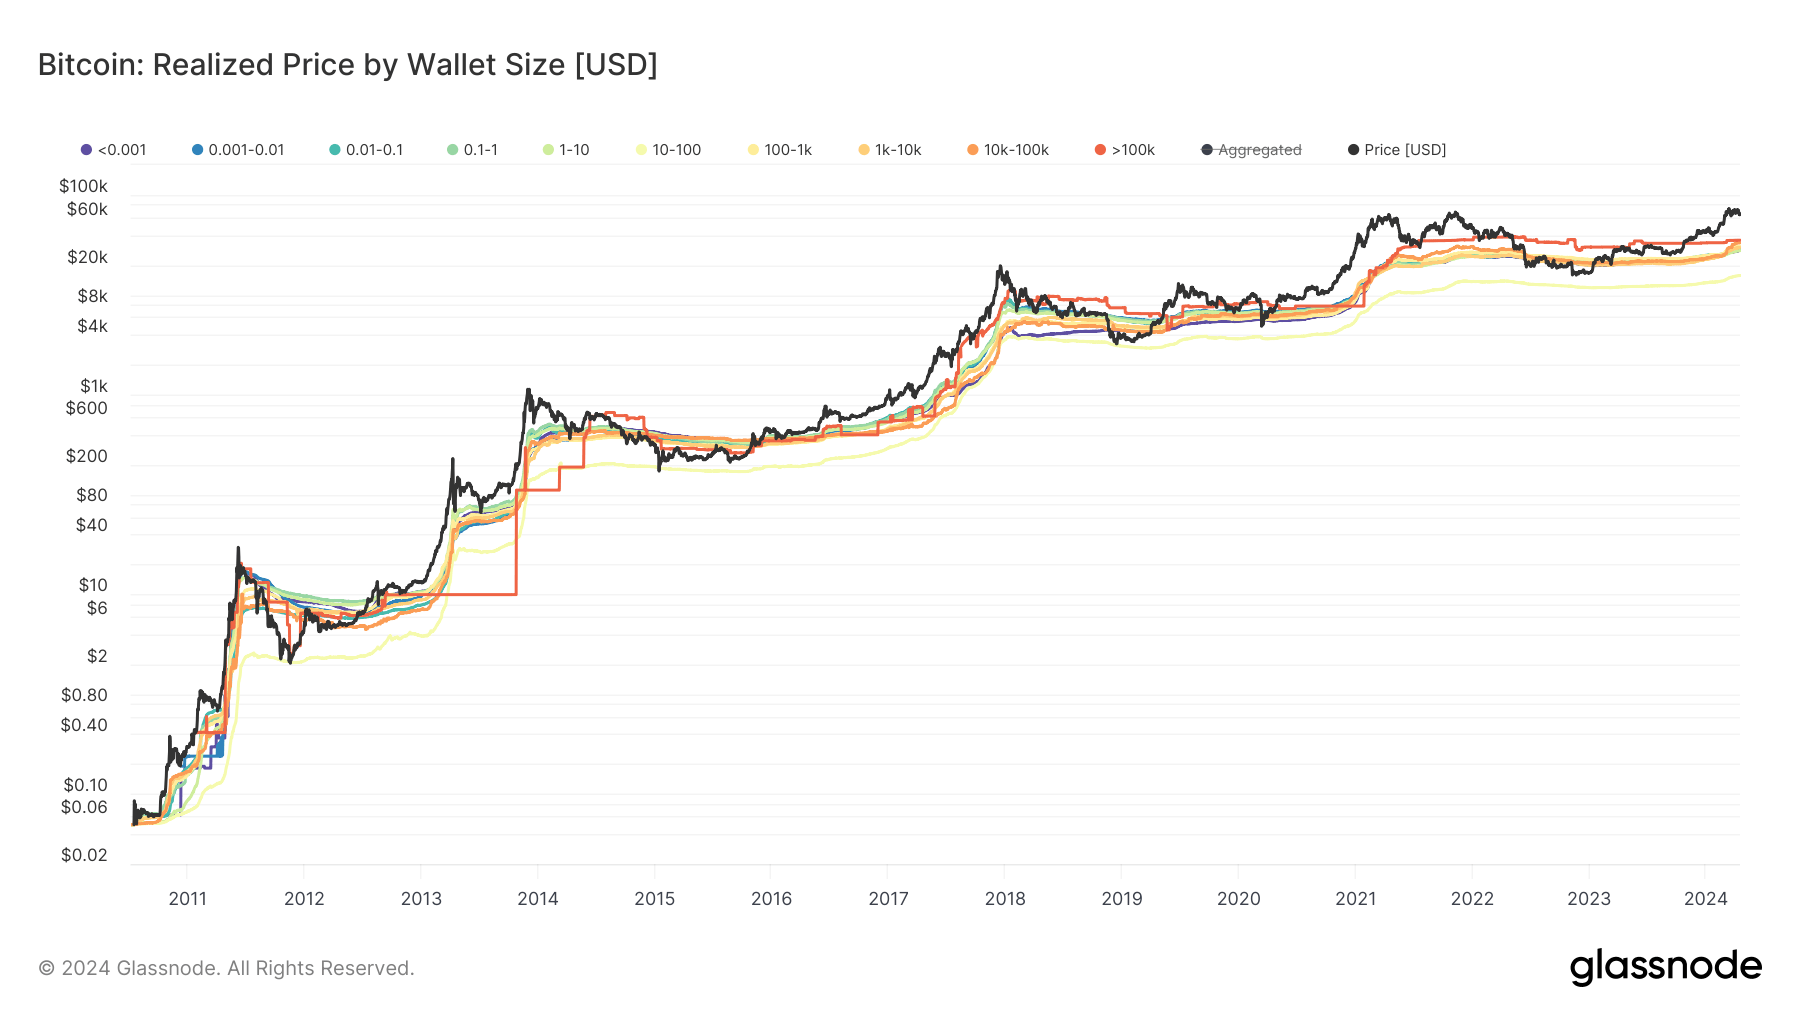 Bitcoin realize price by wallet size (Glassnode)